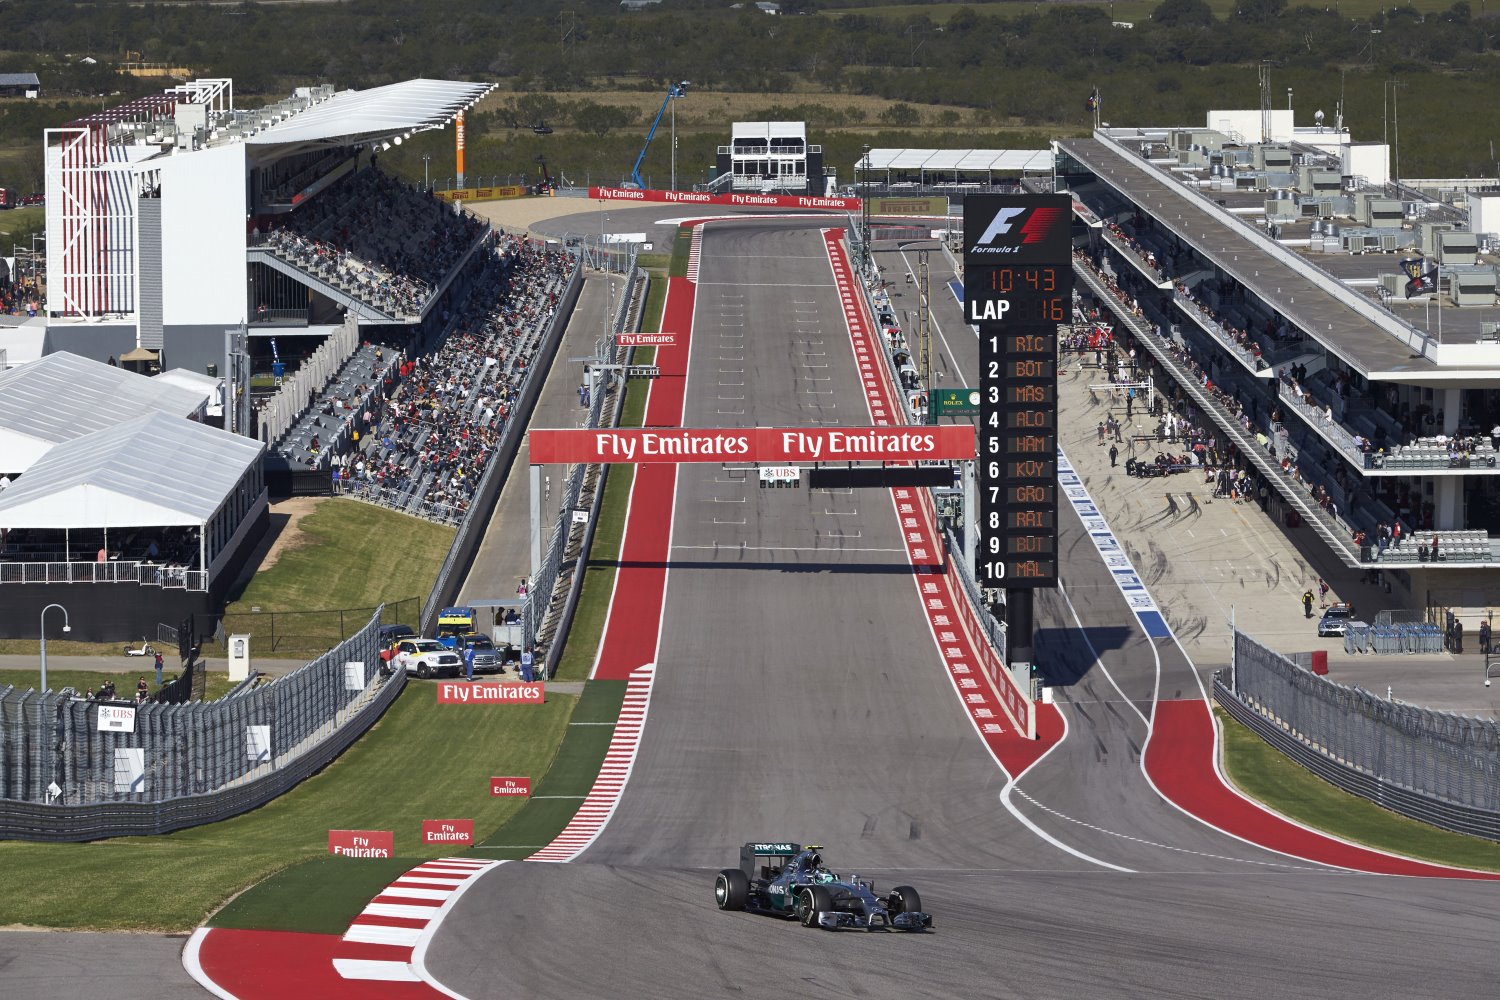 Losing yet another USGP will be bad